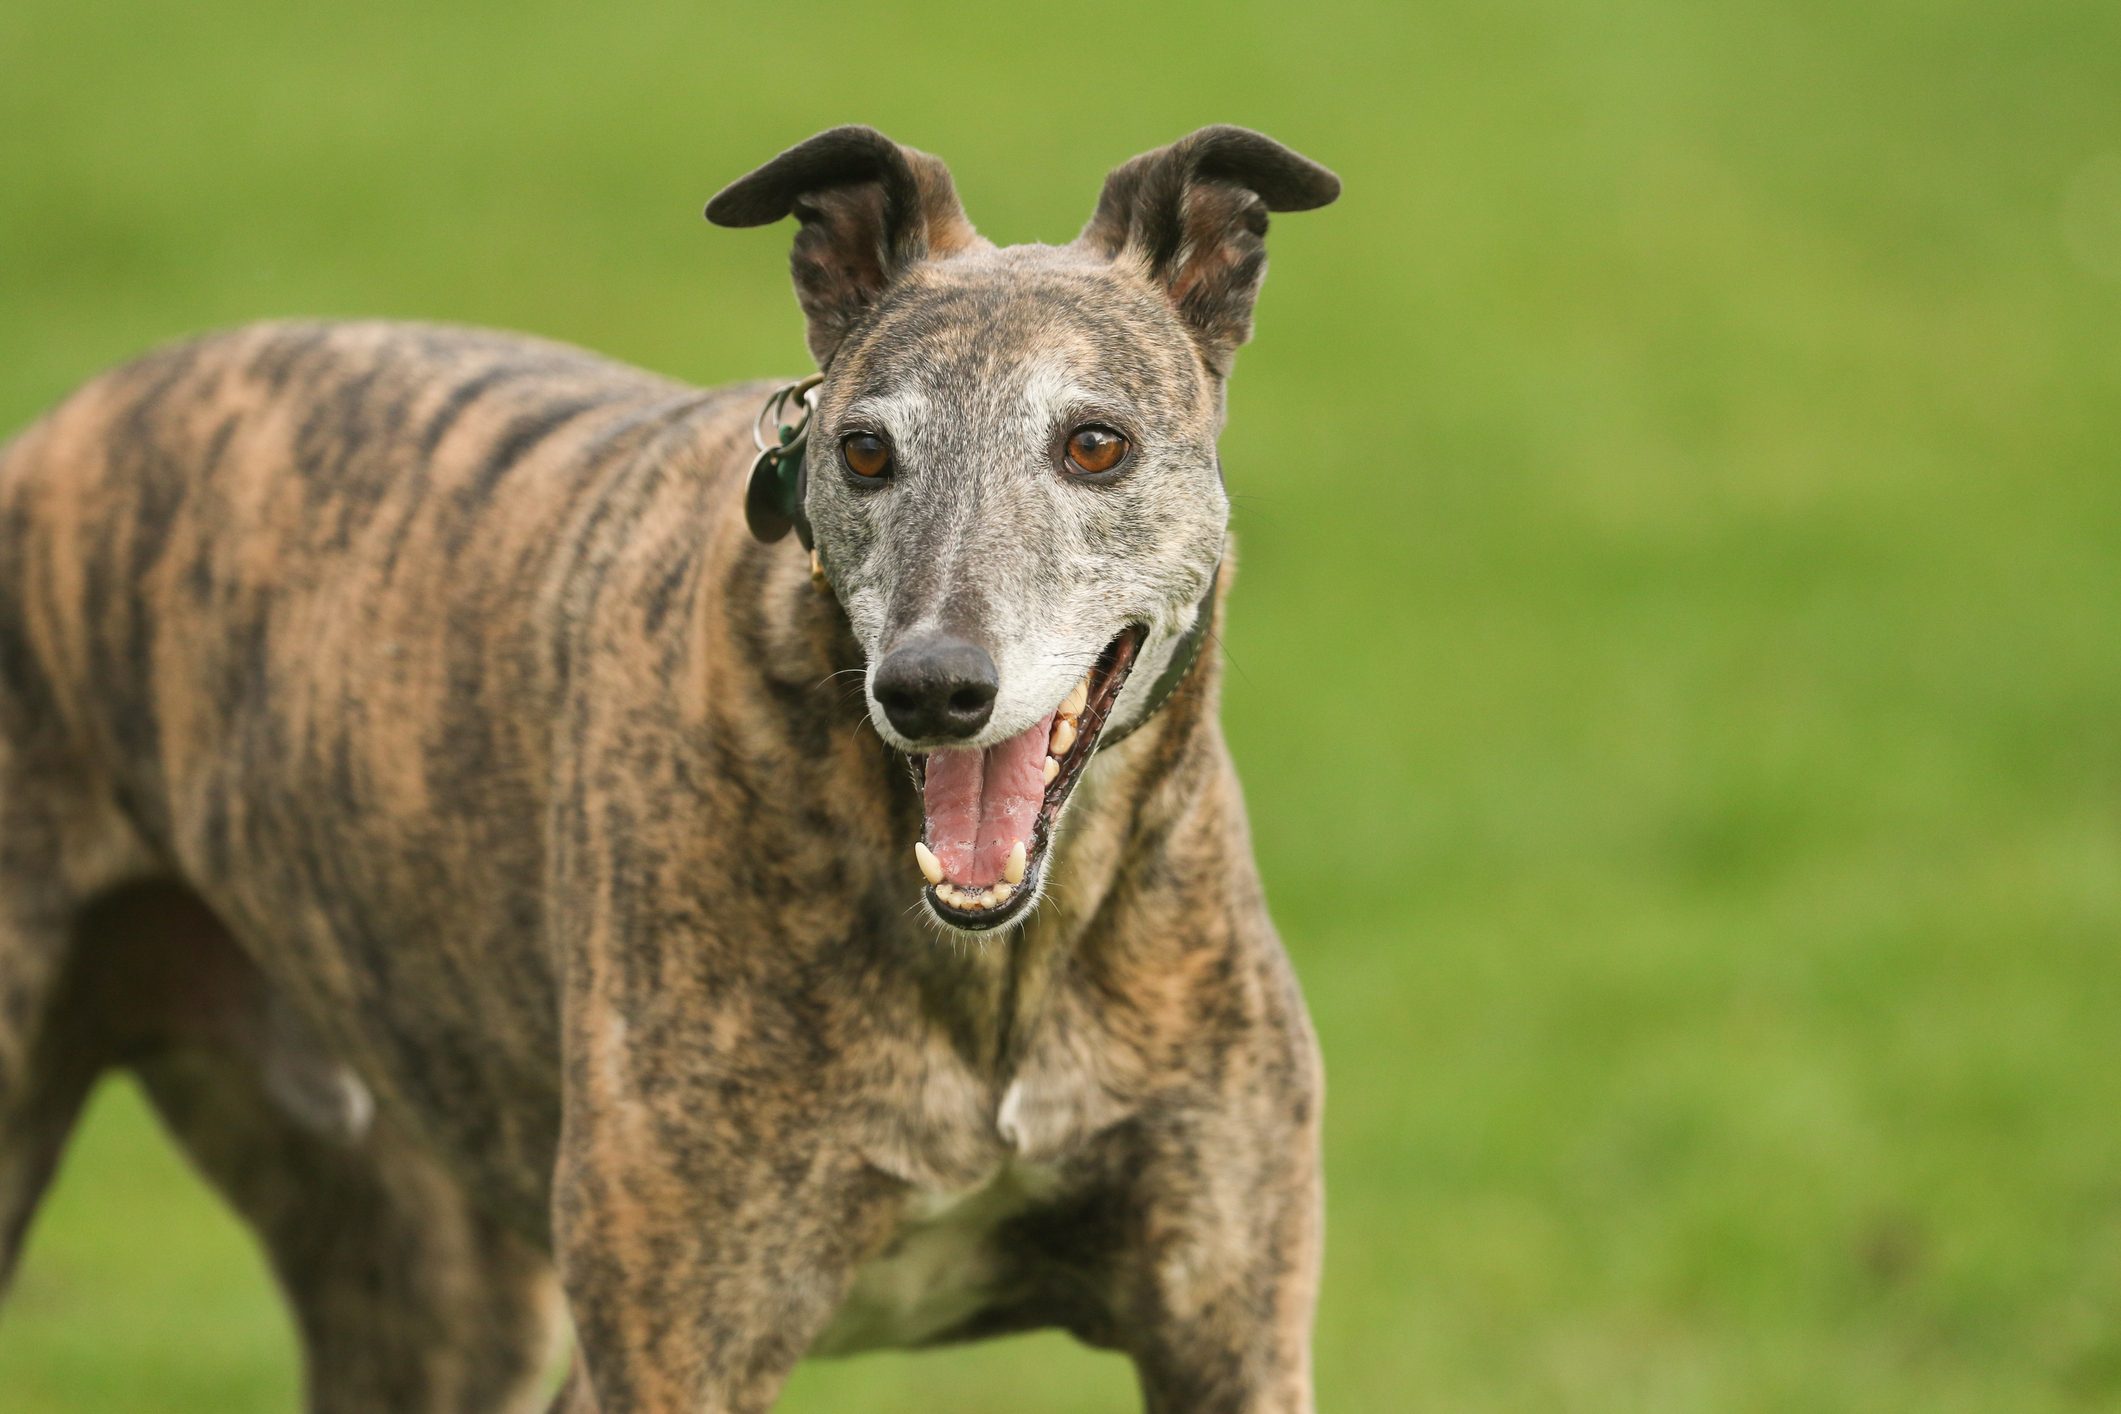 A magnificent brindle coloured Greyhound, canis lupus familiaris, playing in a field.